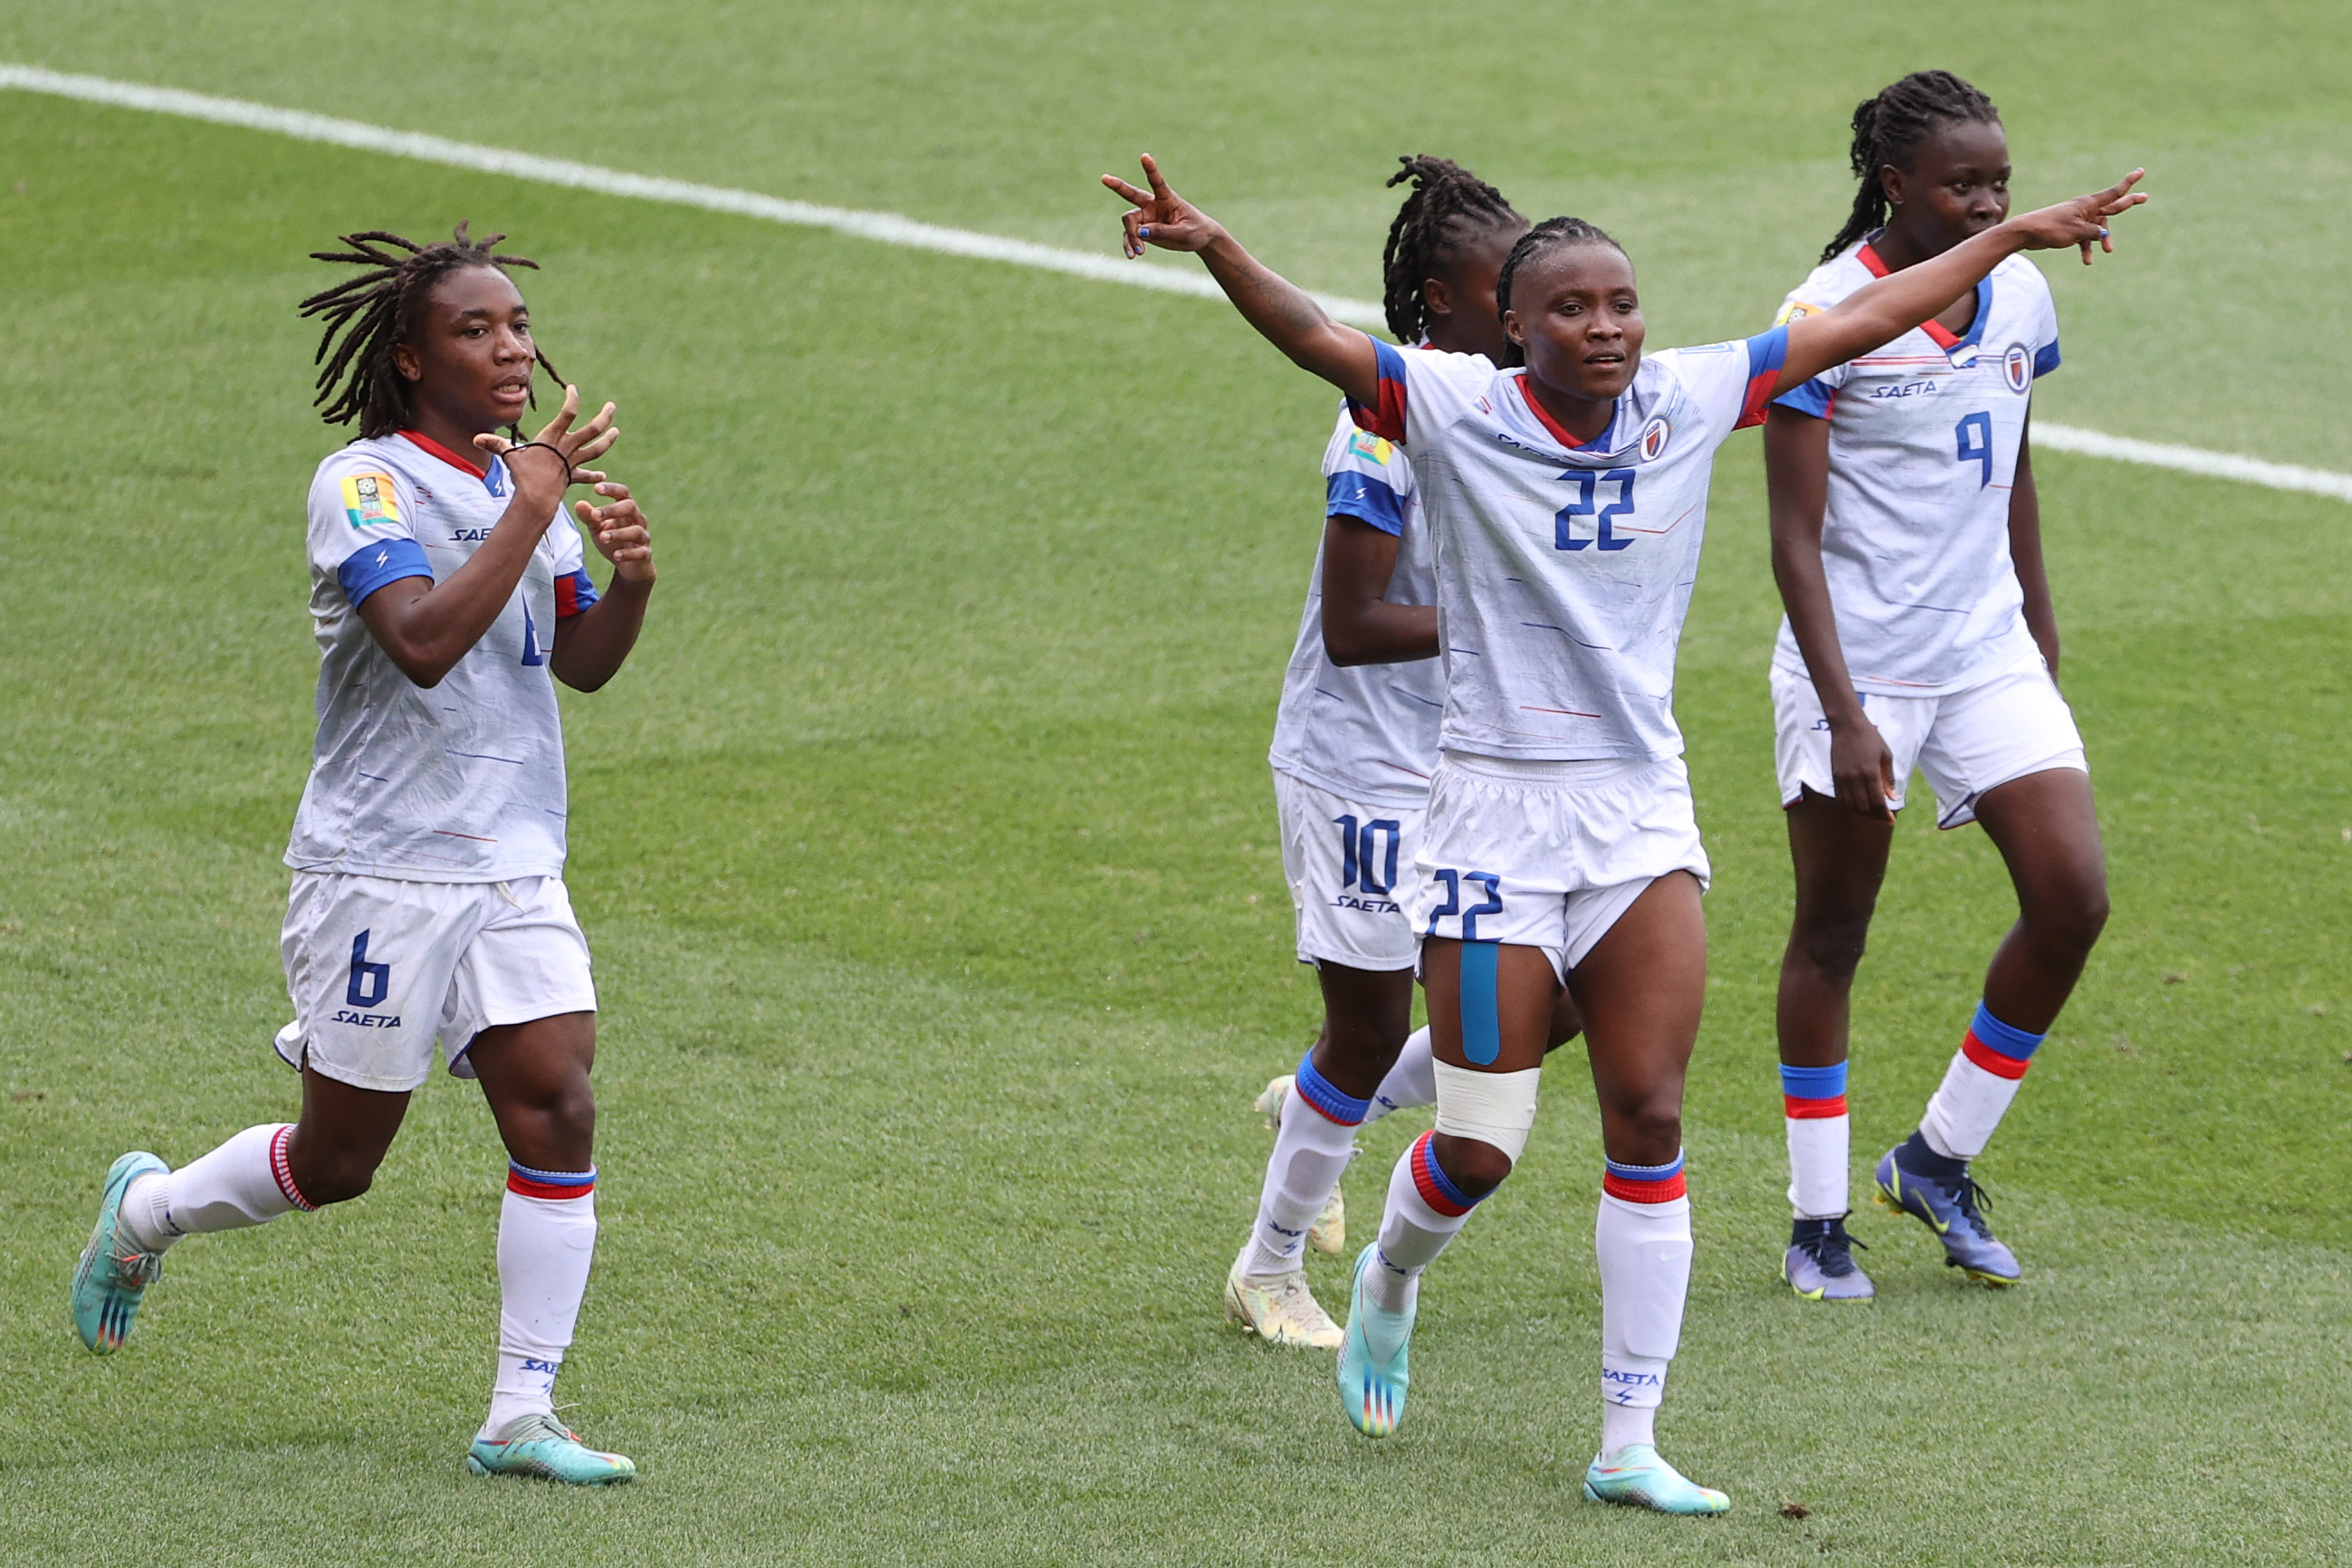 Haiti hungry to leave mark in first Womens World Cup